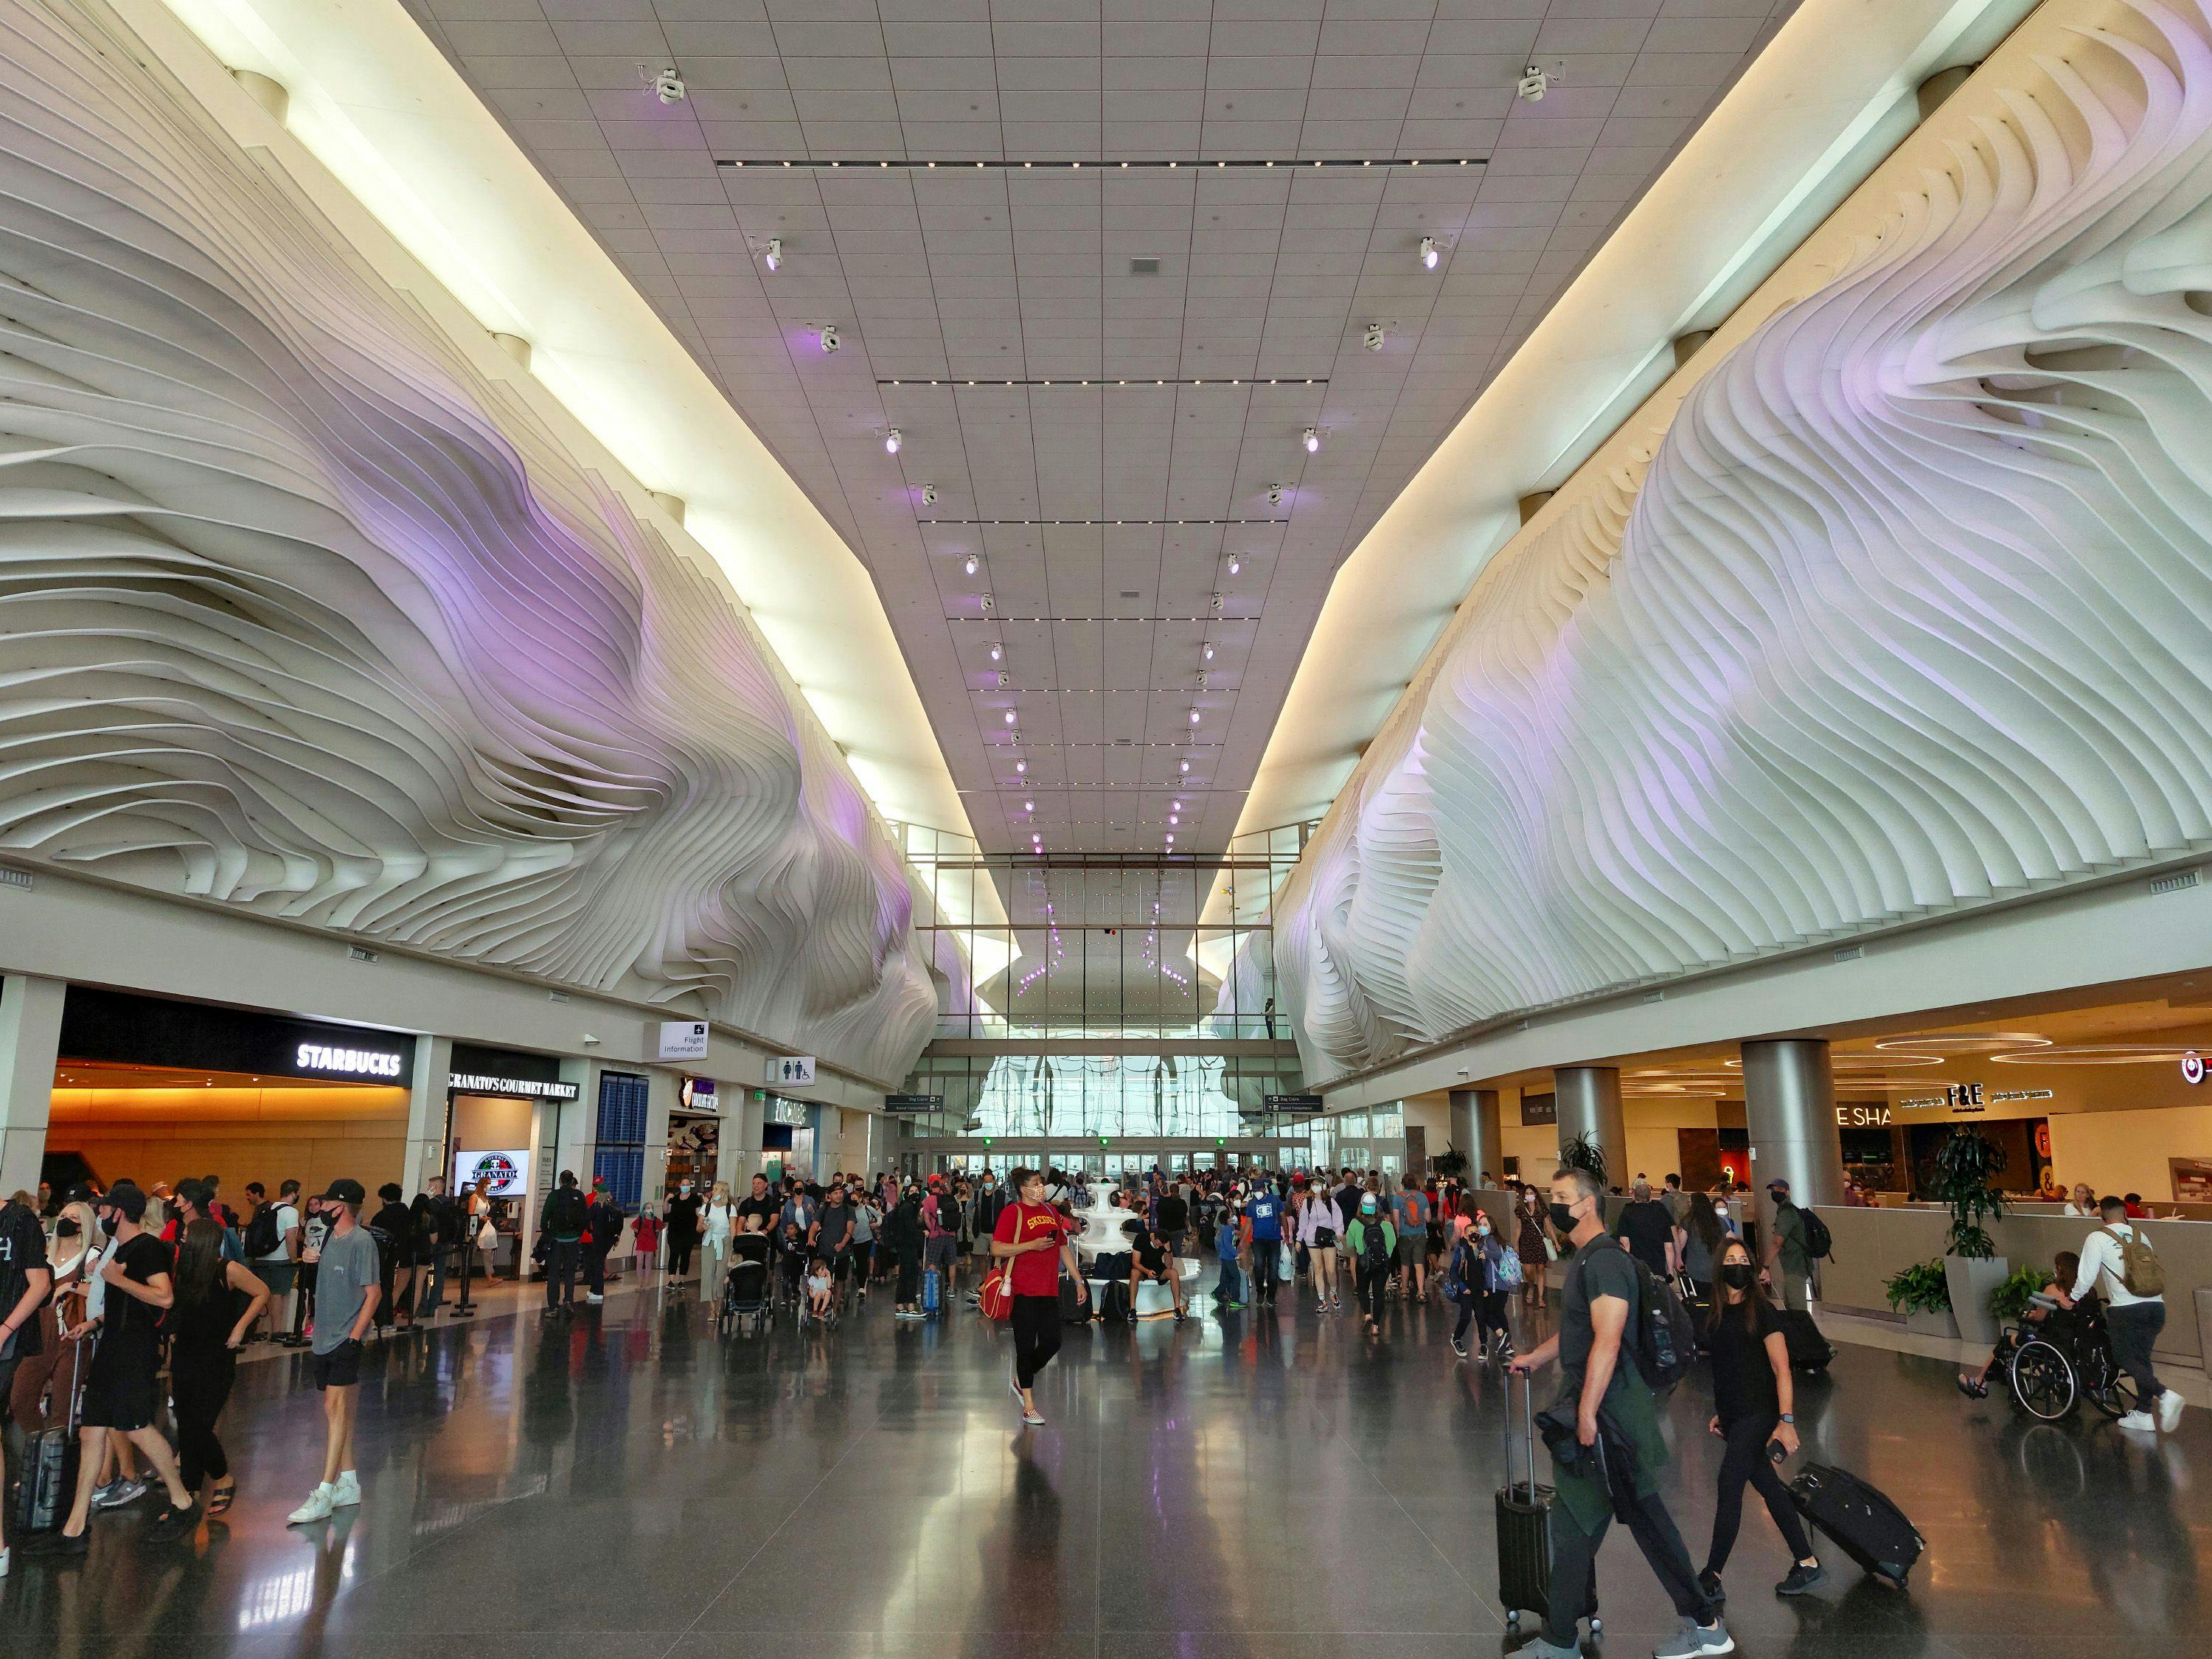 Passengers pass through the central part of the brand new terminal at Salt Lake City International Airport